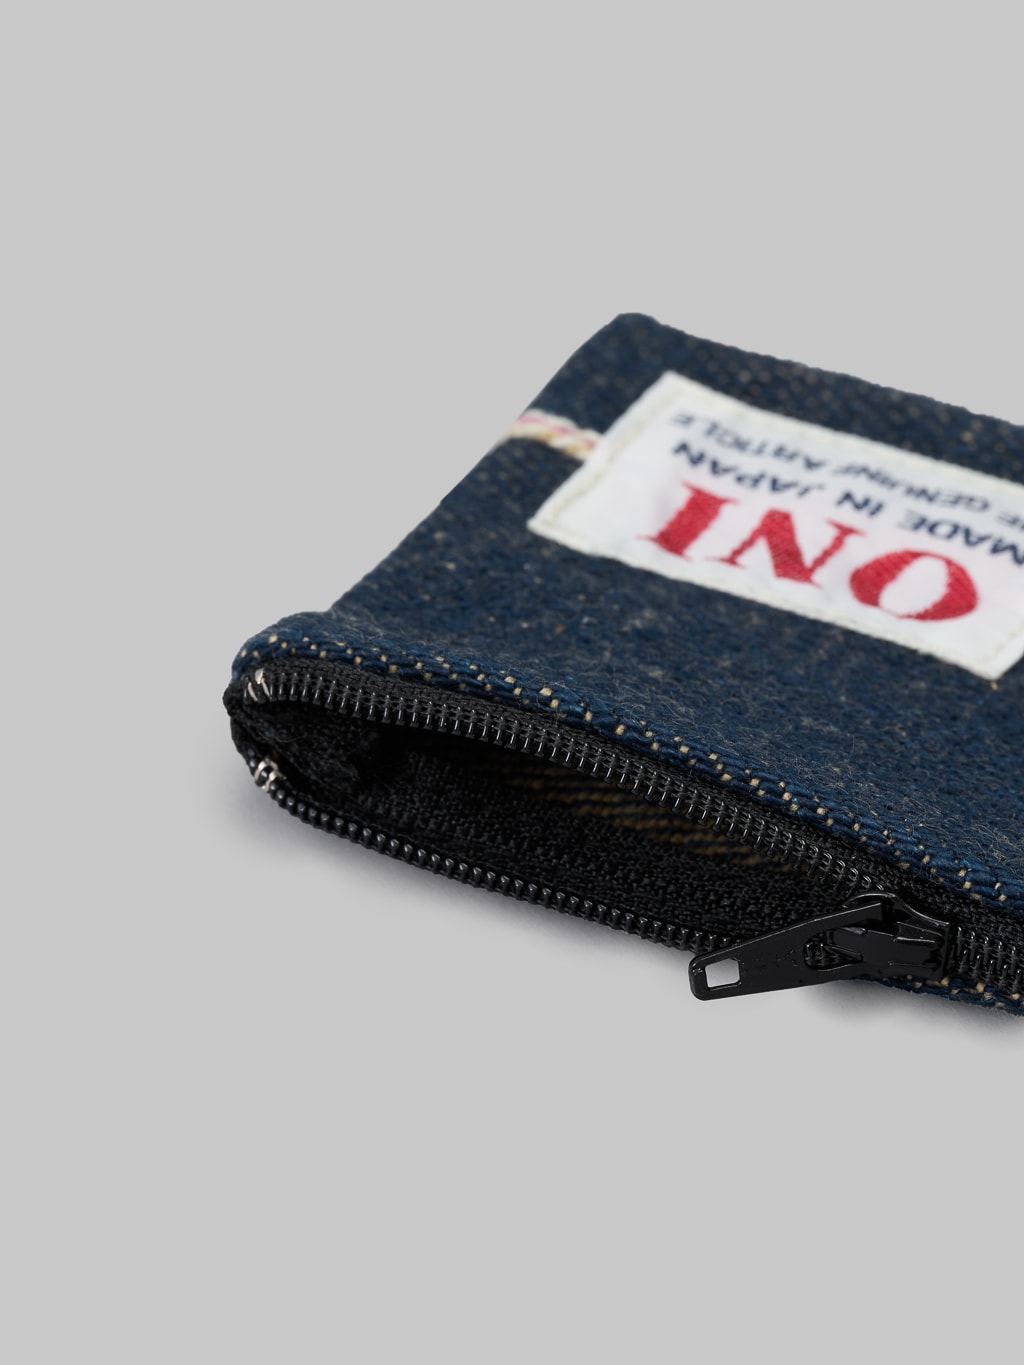 Oni denim selvedge coin pouch made in japan